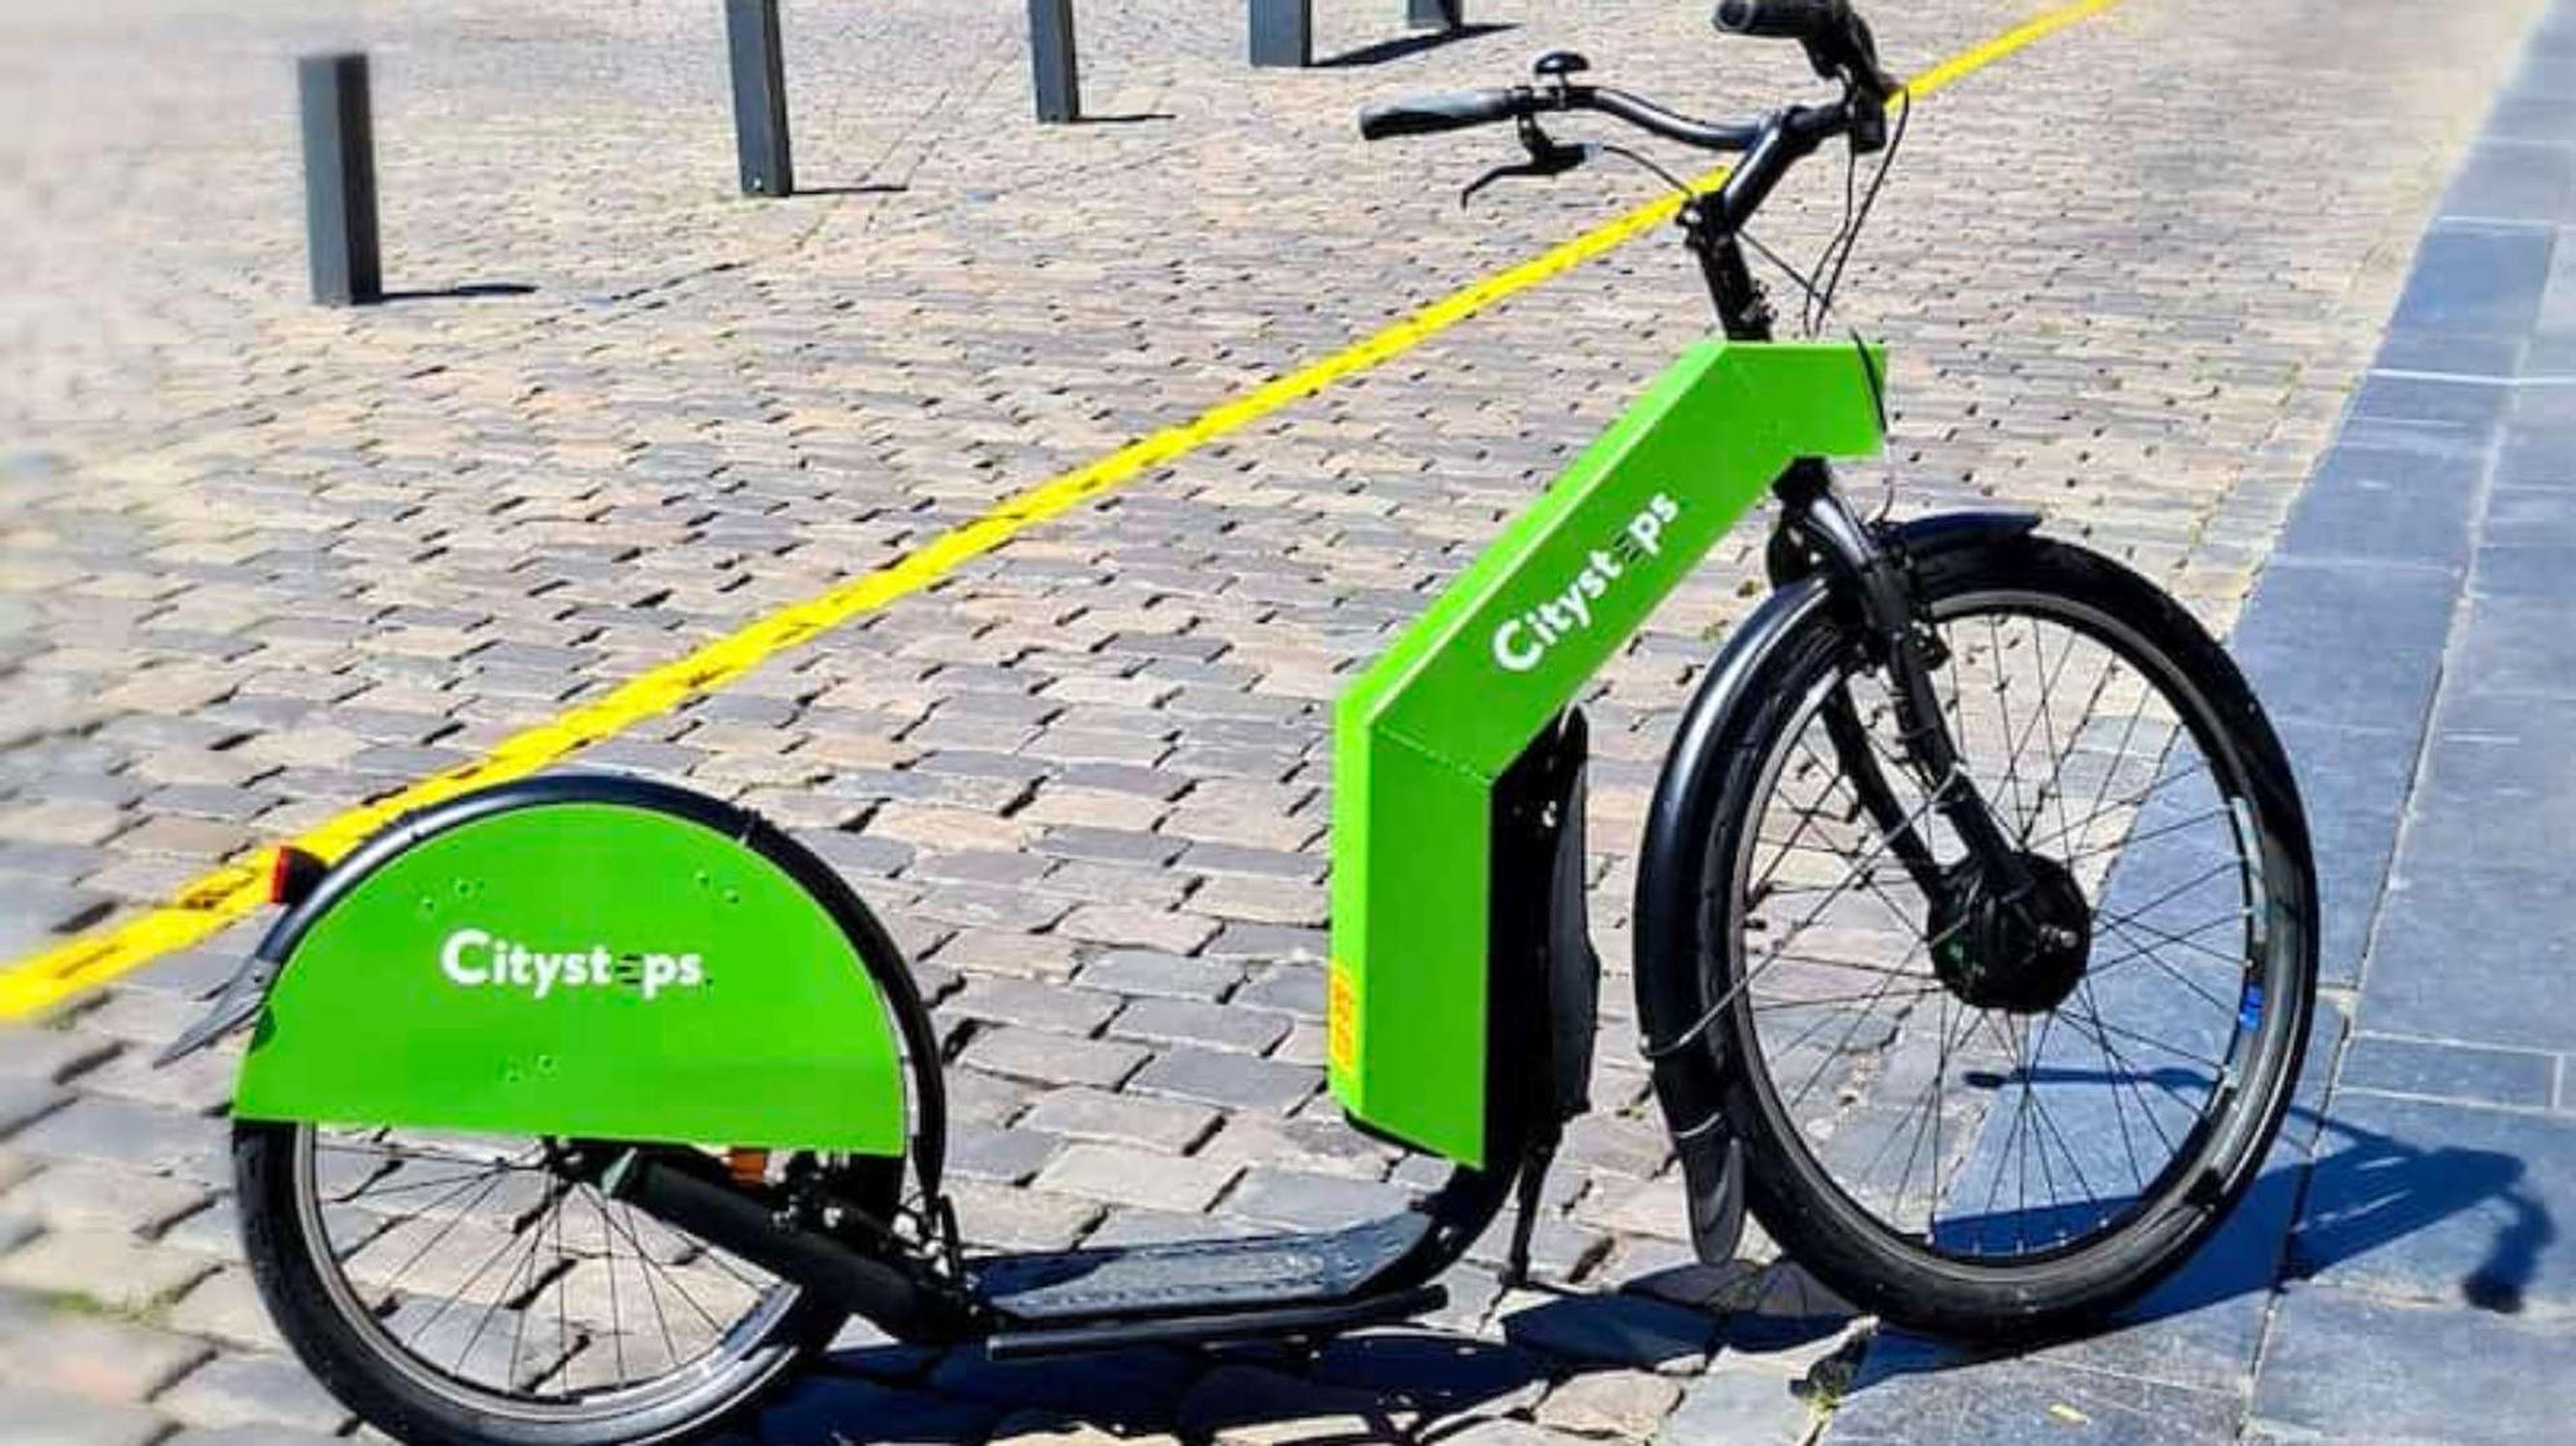 Roermond in the Netherlands is using a new design of e-scooter with large wheels. Escooters are not currently legal in most of the Netherlands